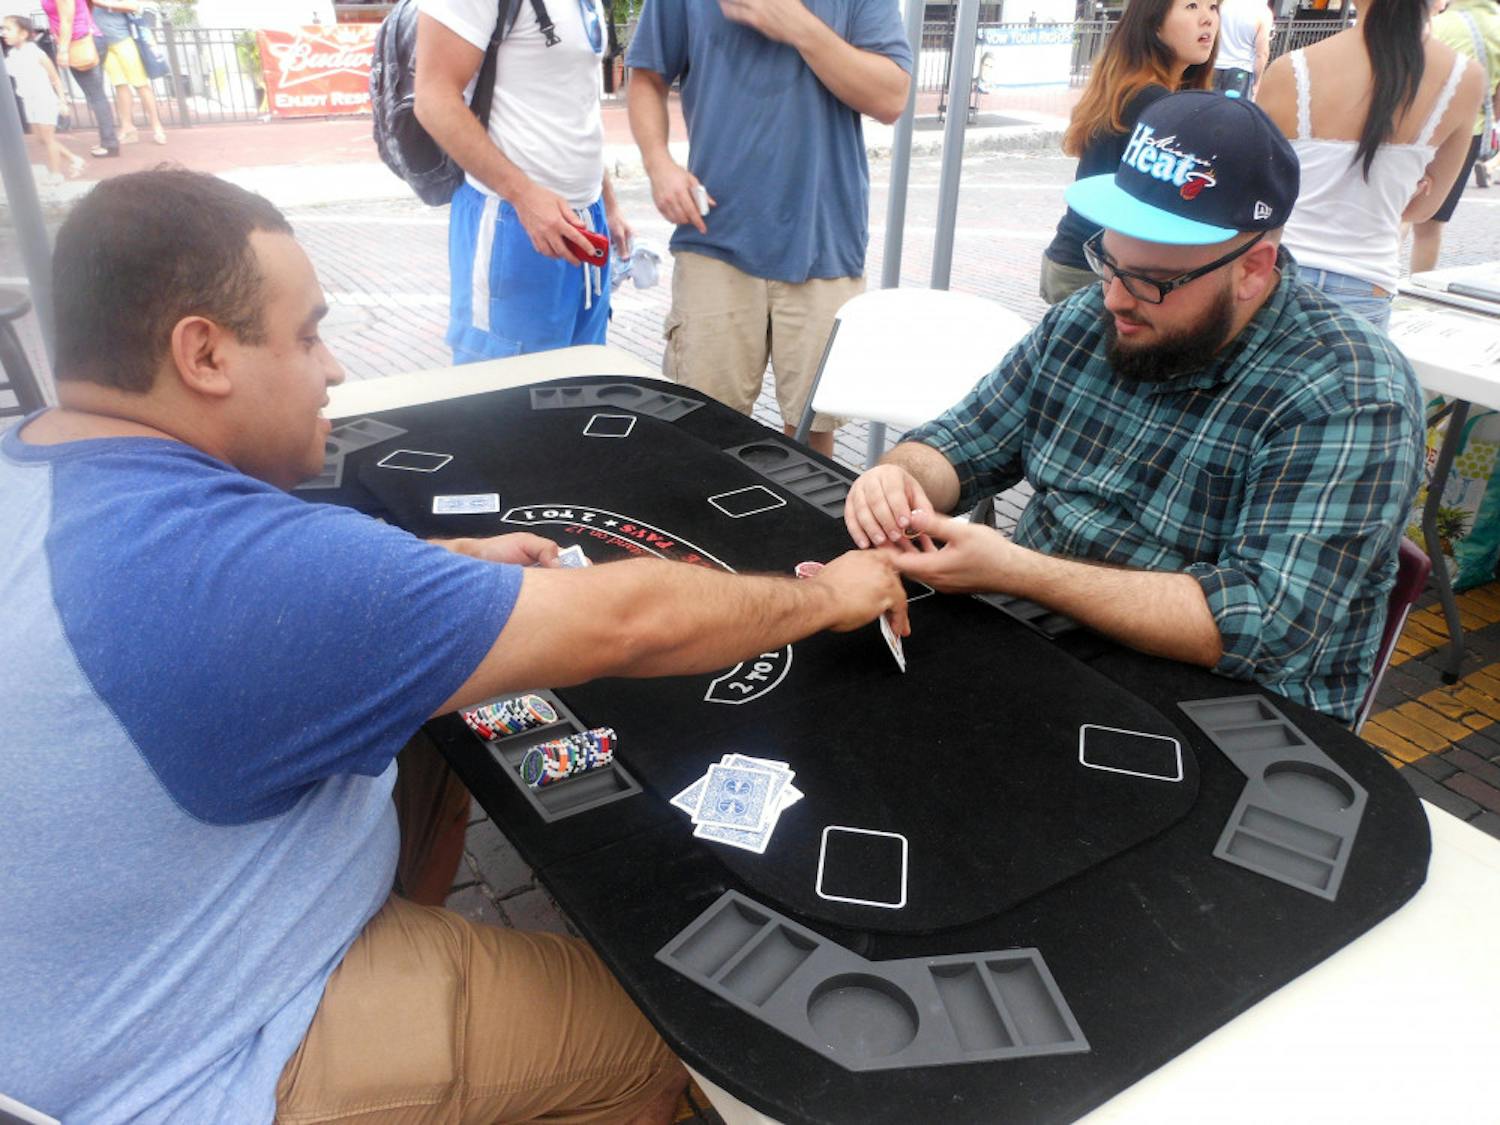 Tony Espetia, client relations director for The Pledge 5 Foundation, left, and Hector Galvez play for a cause at the blackjack table during the “Viva Gainesvegas” charity event Friday evening. 